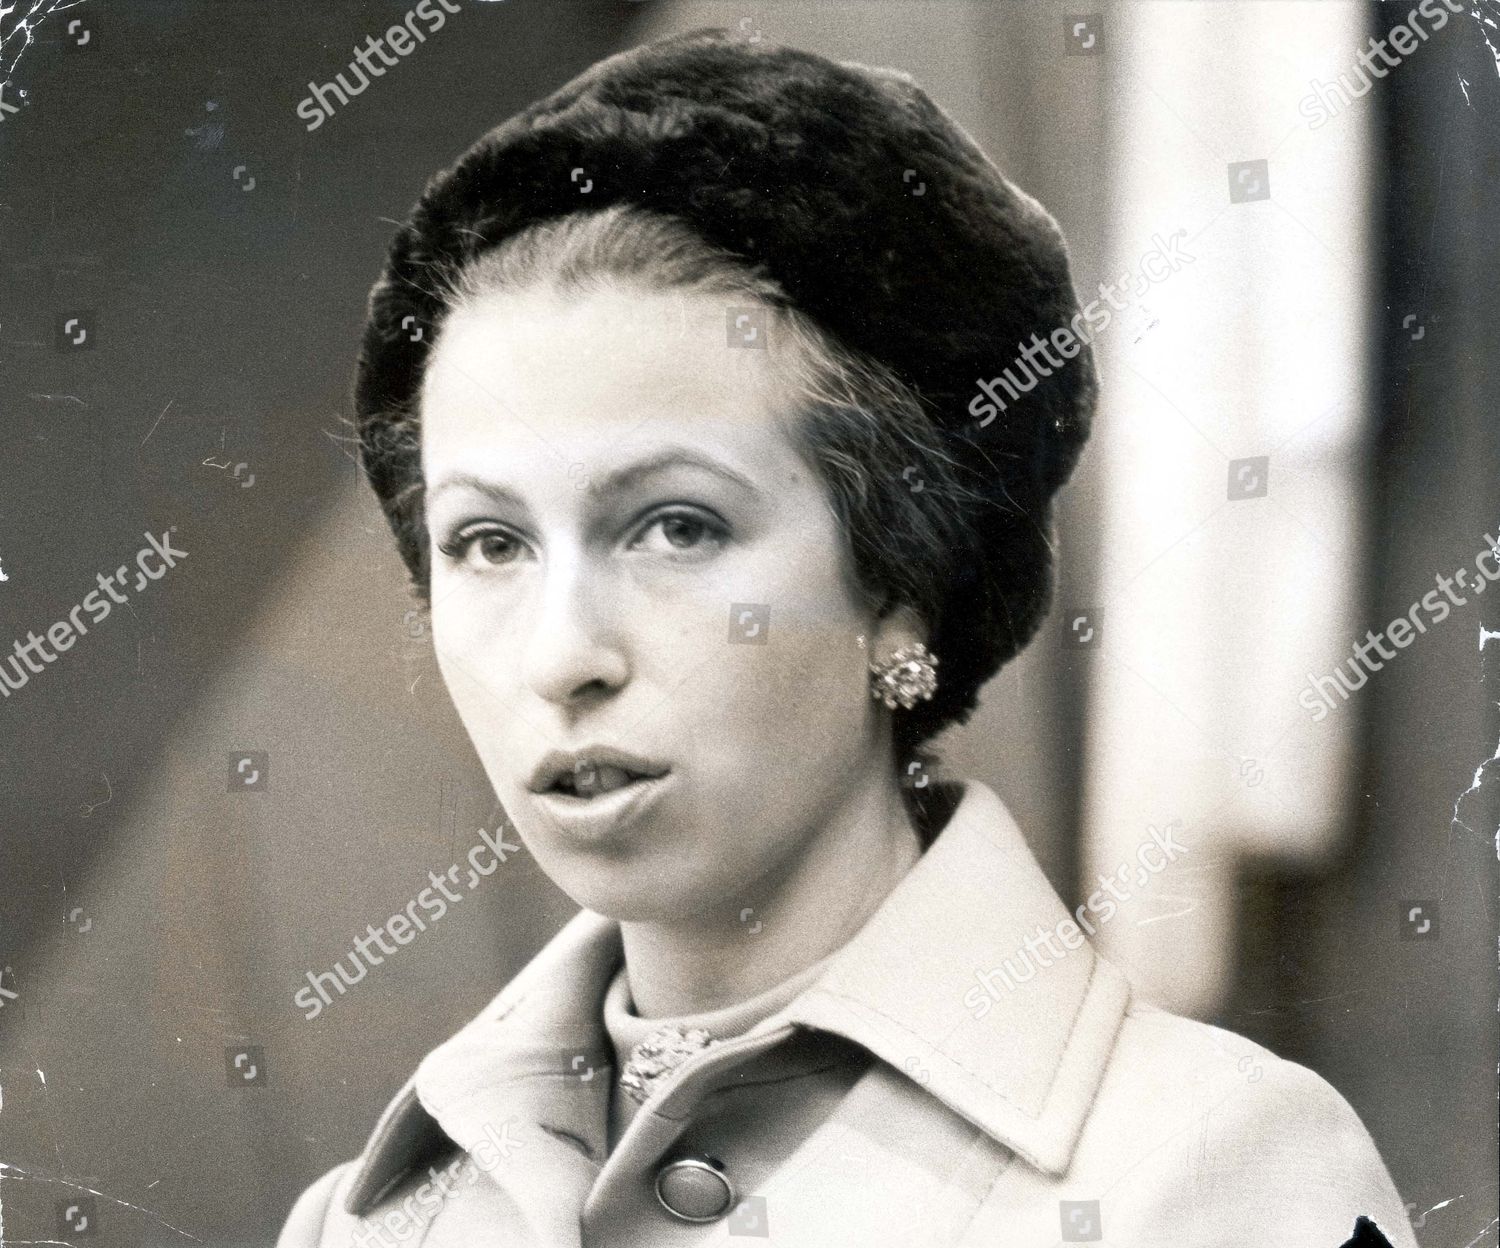 princess-royal-october-1974-princess-anne-opening-the-domestic-exhibition-at-olympia-today-royalty-shutterstock-editorial-895520a.jpg